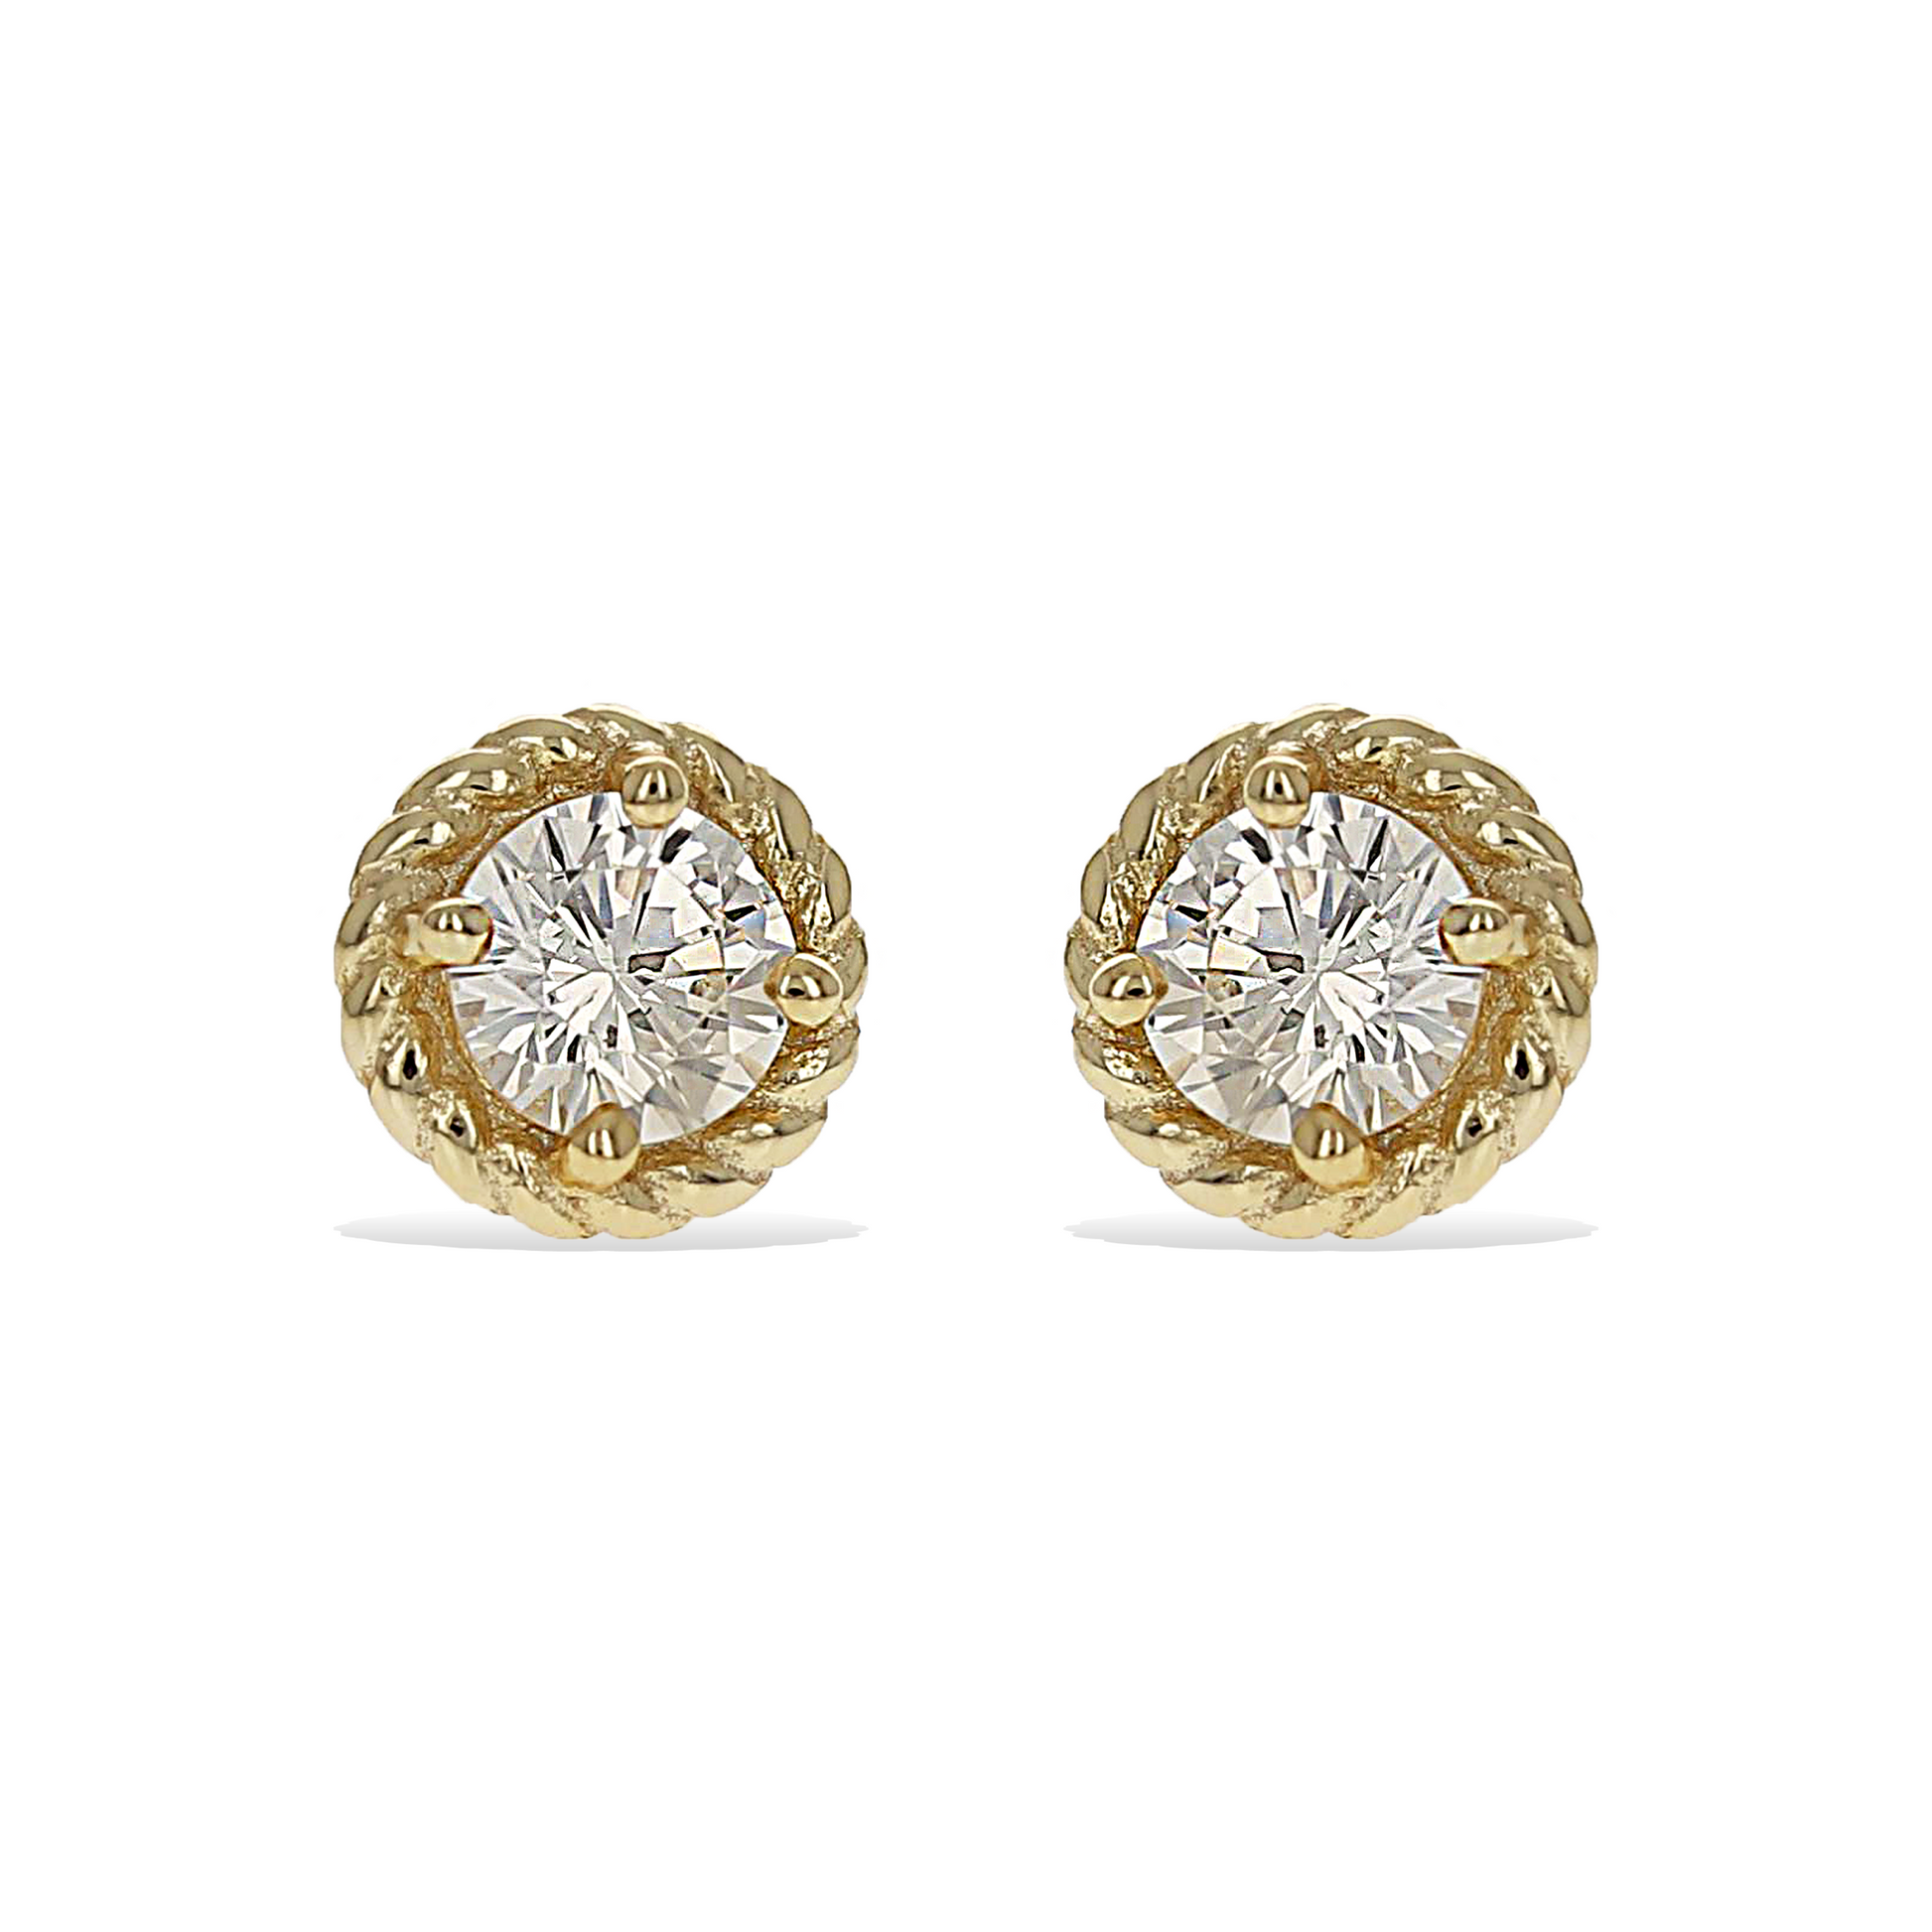 Classic round brilliant cz stud earrings in gold plated sterling silver | Alexandra marks jewelry